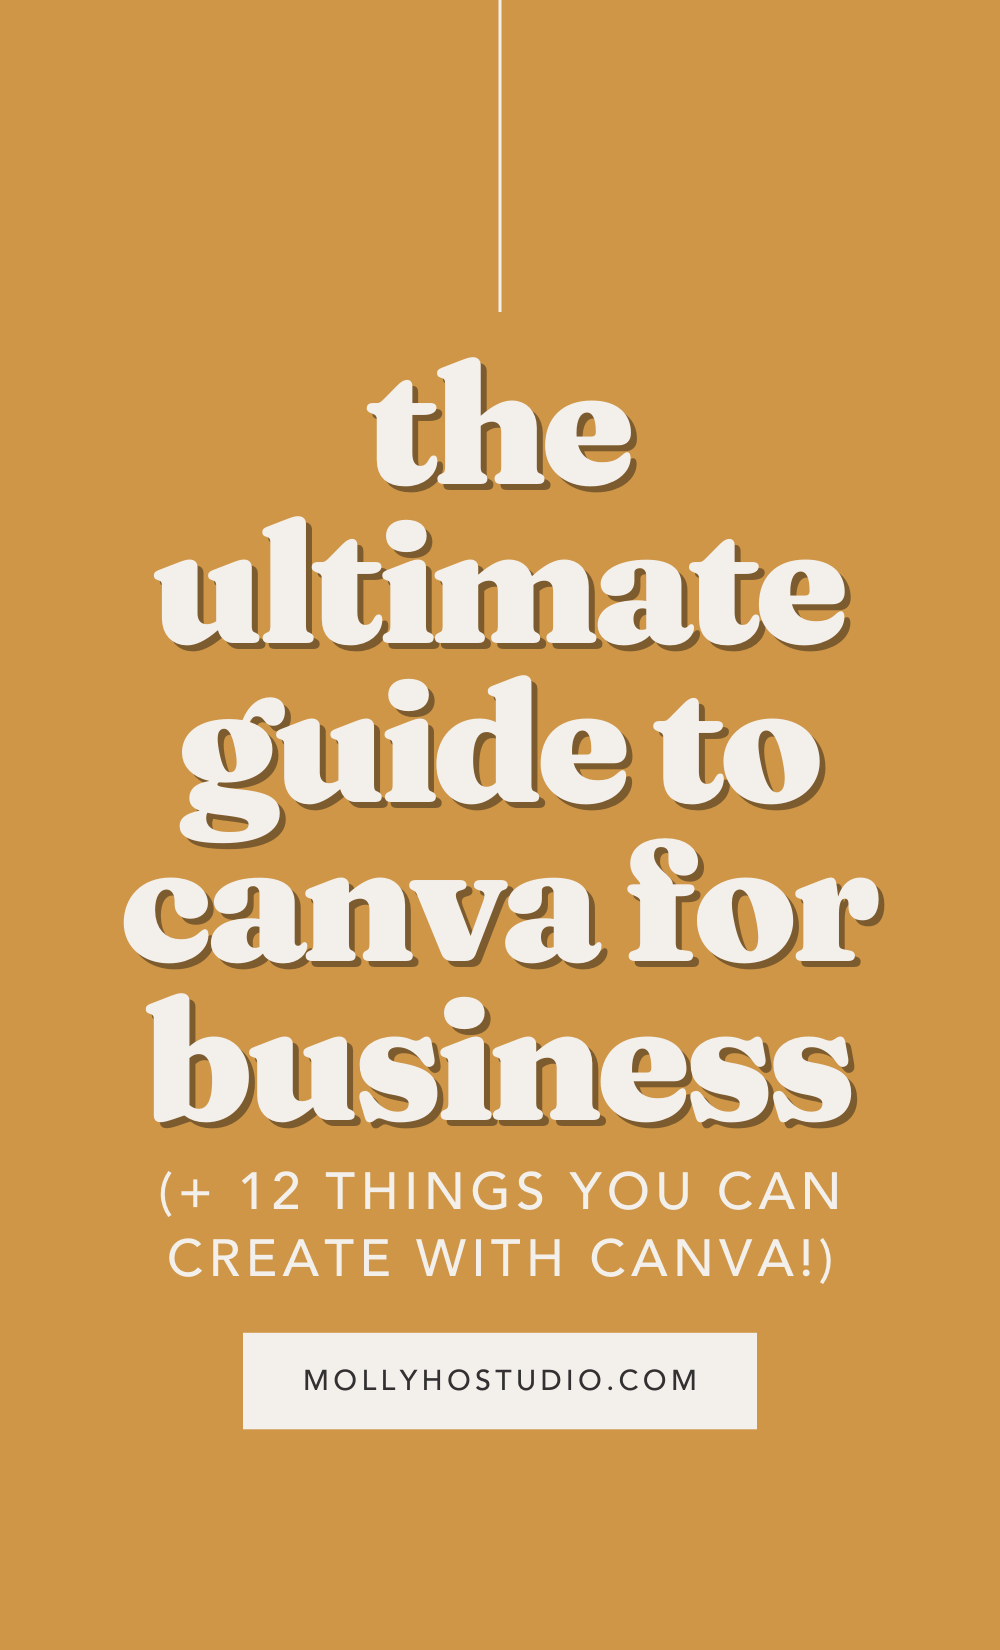 Is Canva a Good Side Hustle?. Can I make any money with this?